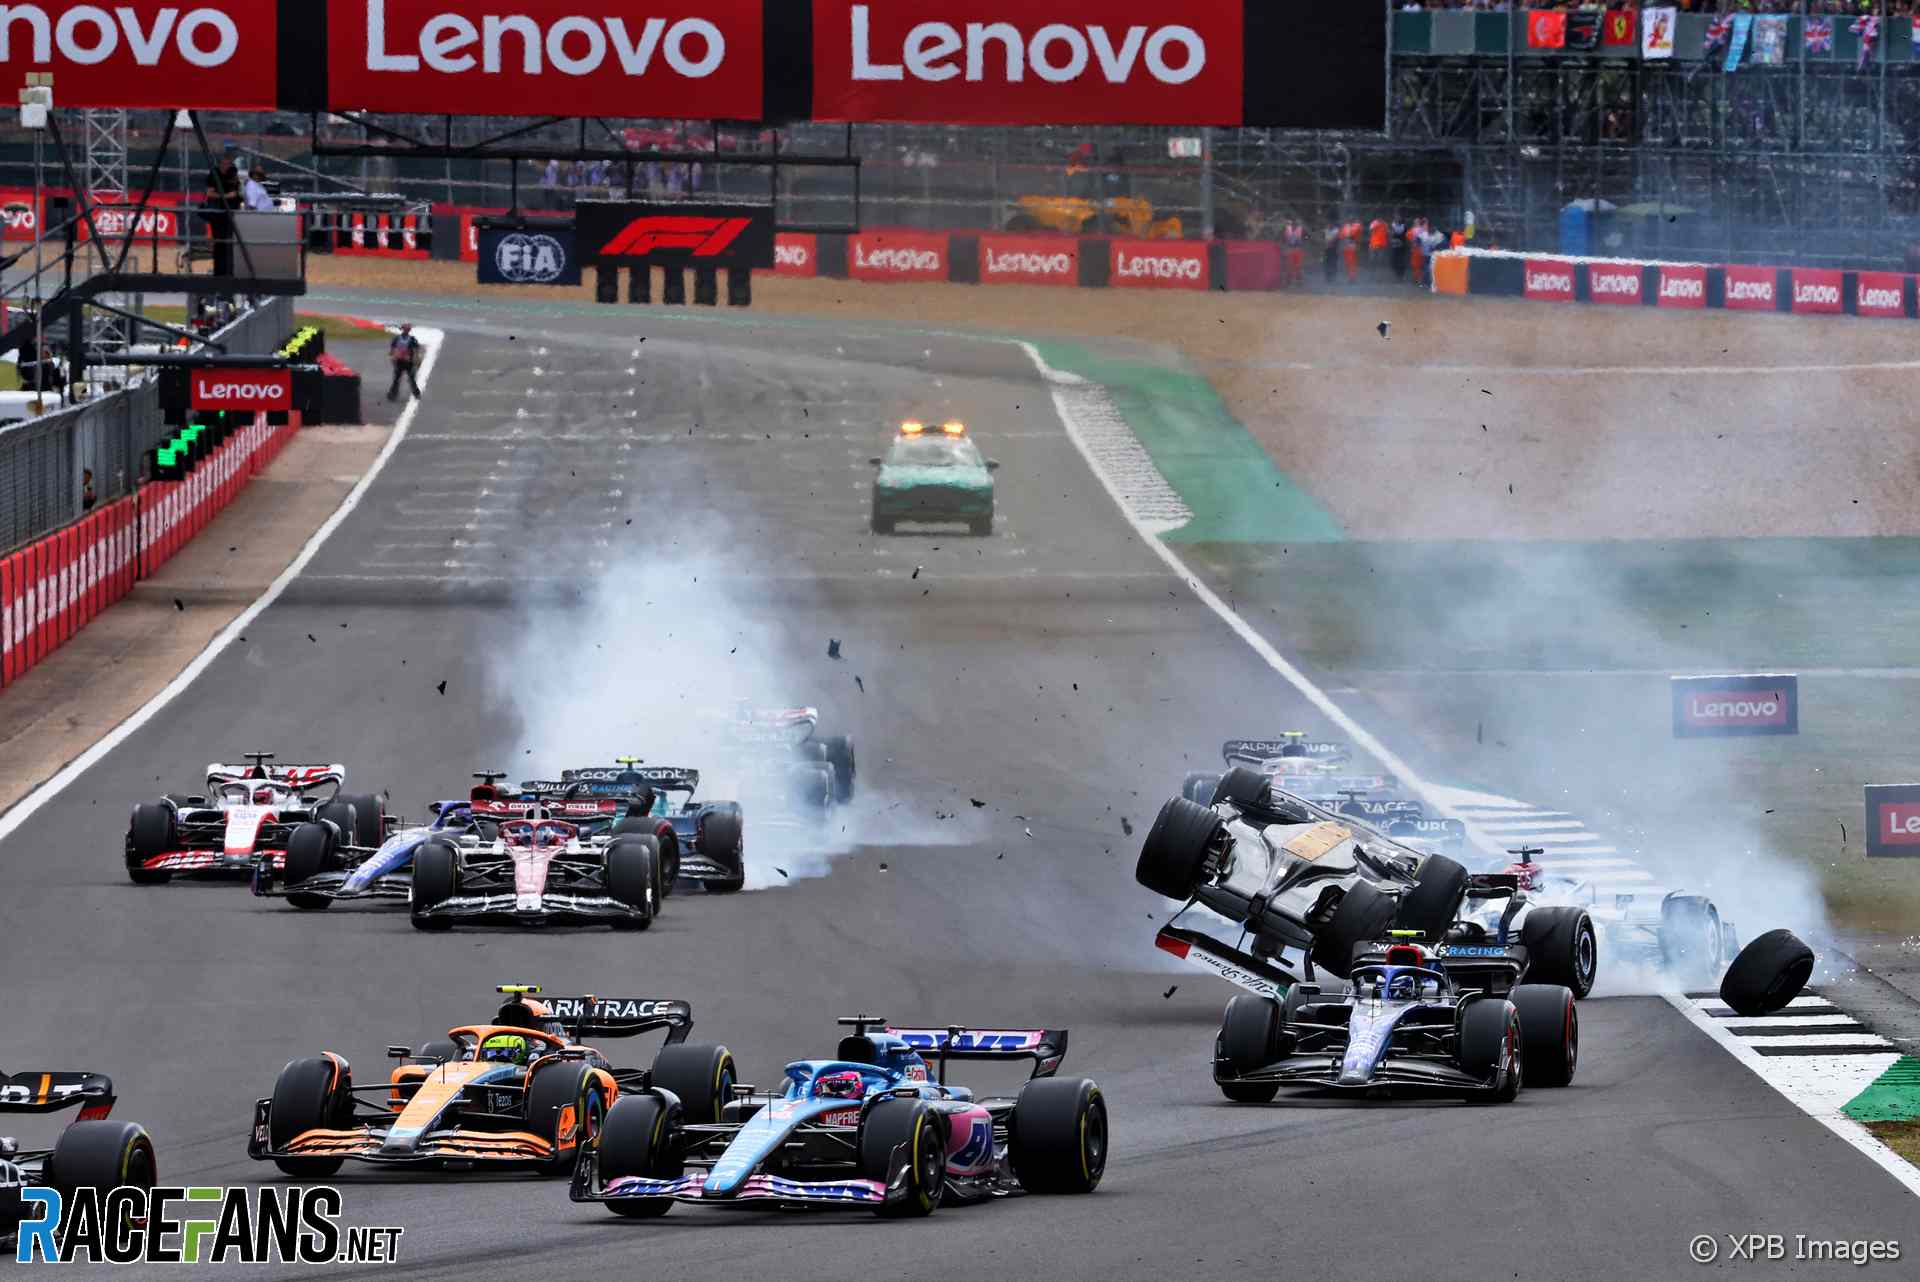 The 2022 British Grand Prix was held at Silverstone and won by Carlos Sainz Jnr